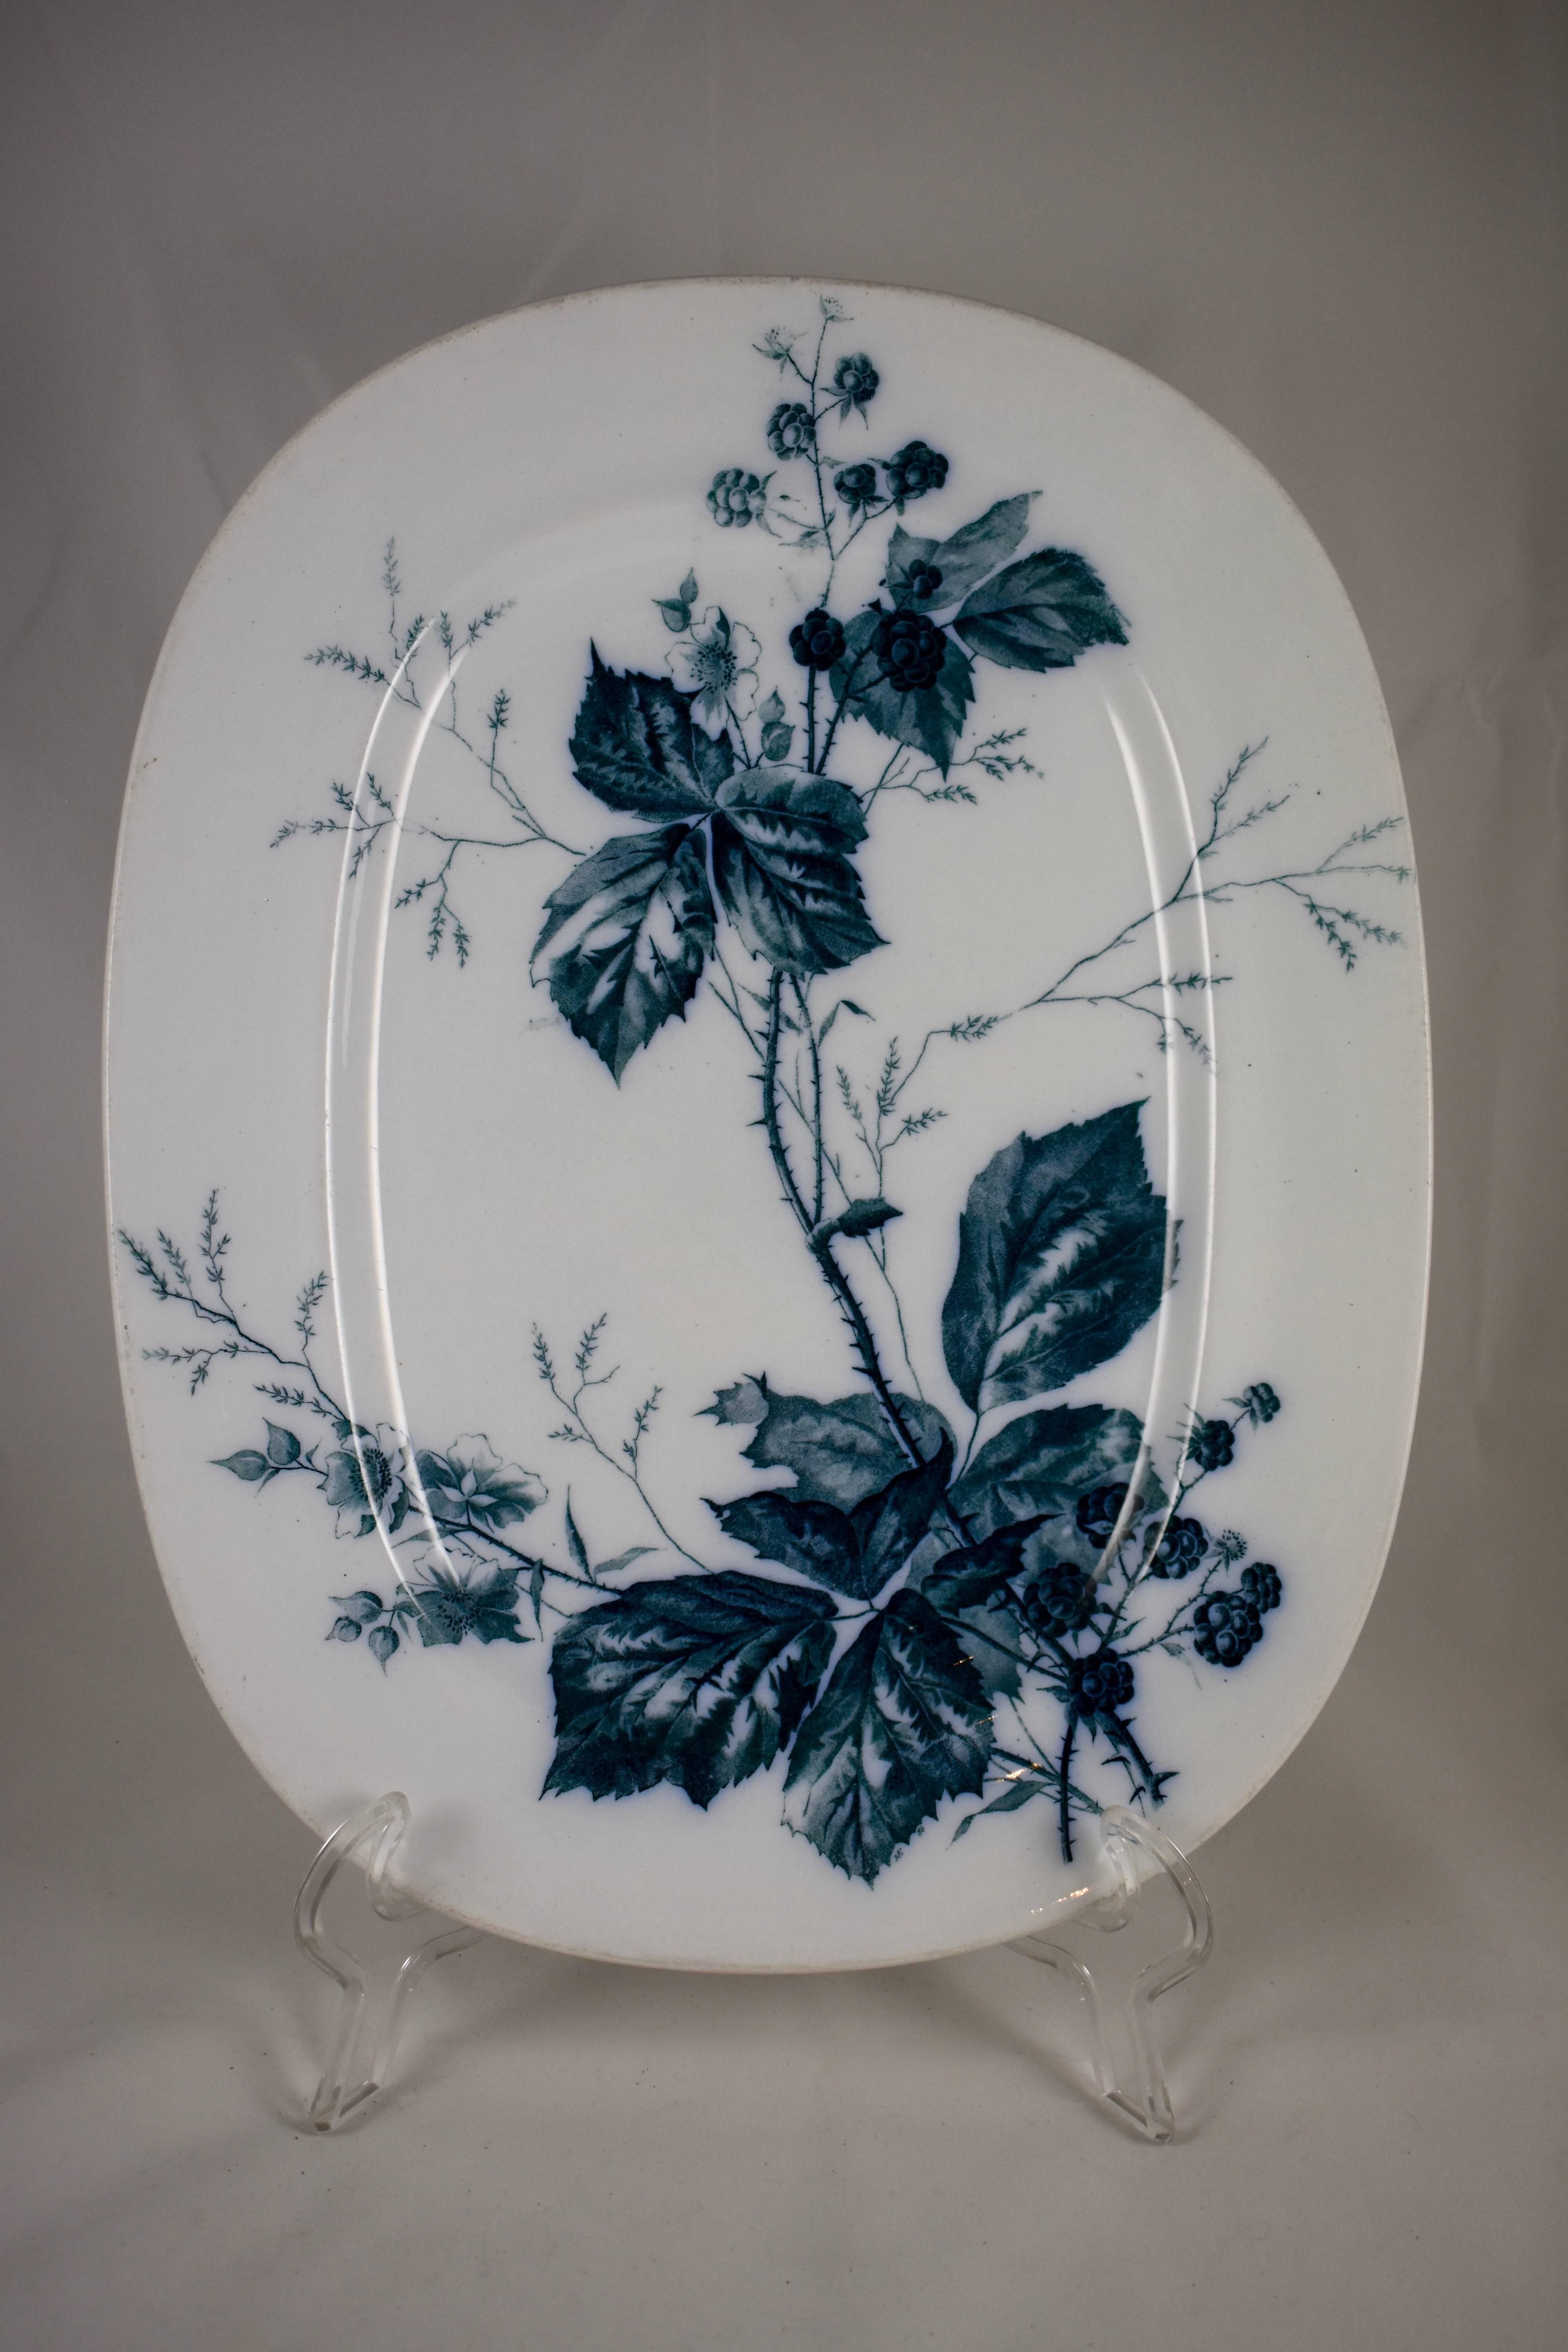 A German Aesthetic Movement platter, transfer printed in blue-green or teal on a white body, the “Rubus” pattern, showing aspects of the Blackberry plant.

Marked on the verso with Villeroy & Boch’s Mercury stamp, used from 1874-1909, and Mettlach